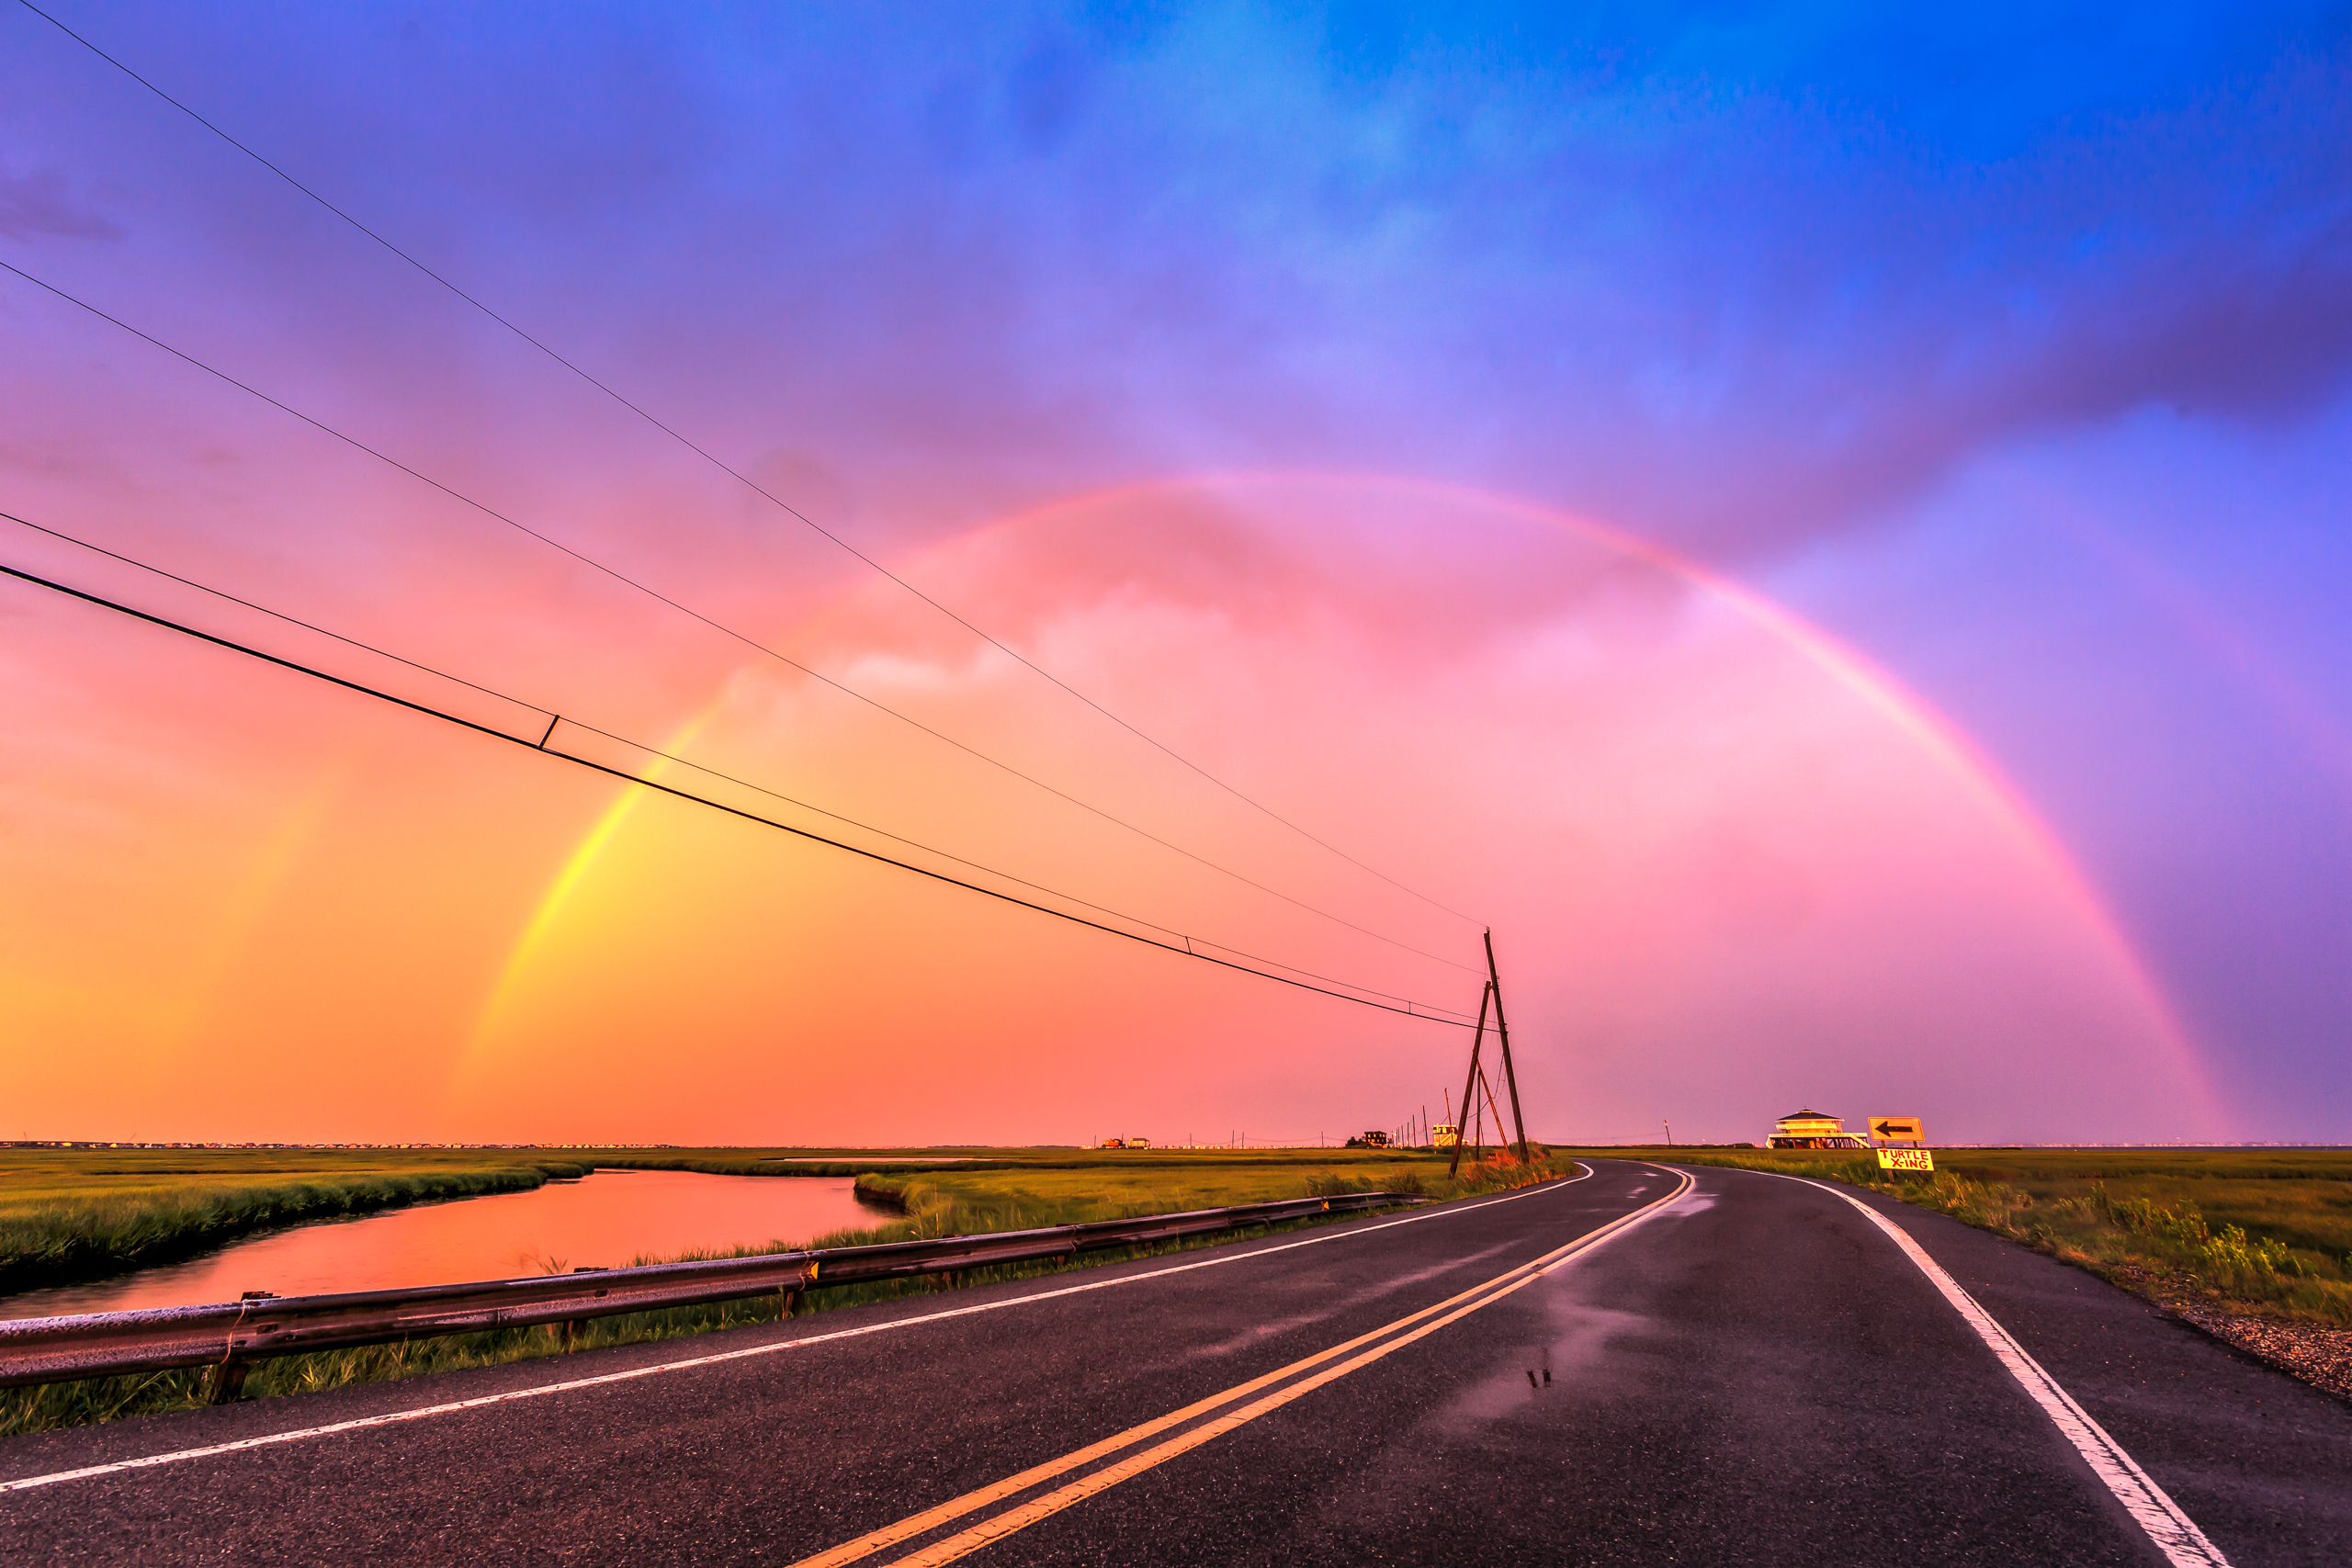 Photograph of a double rainbow arching over power lines and Dock Road at sunset